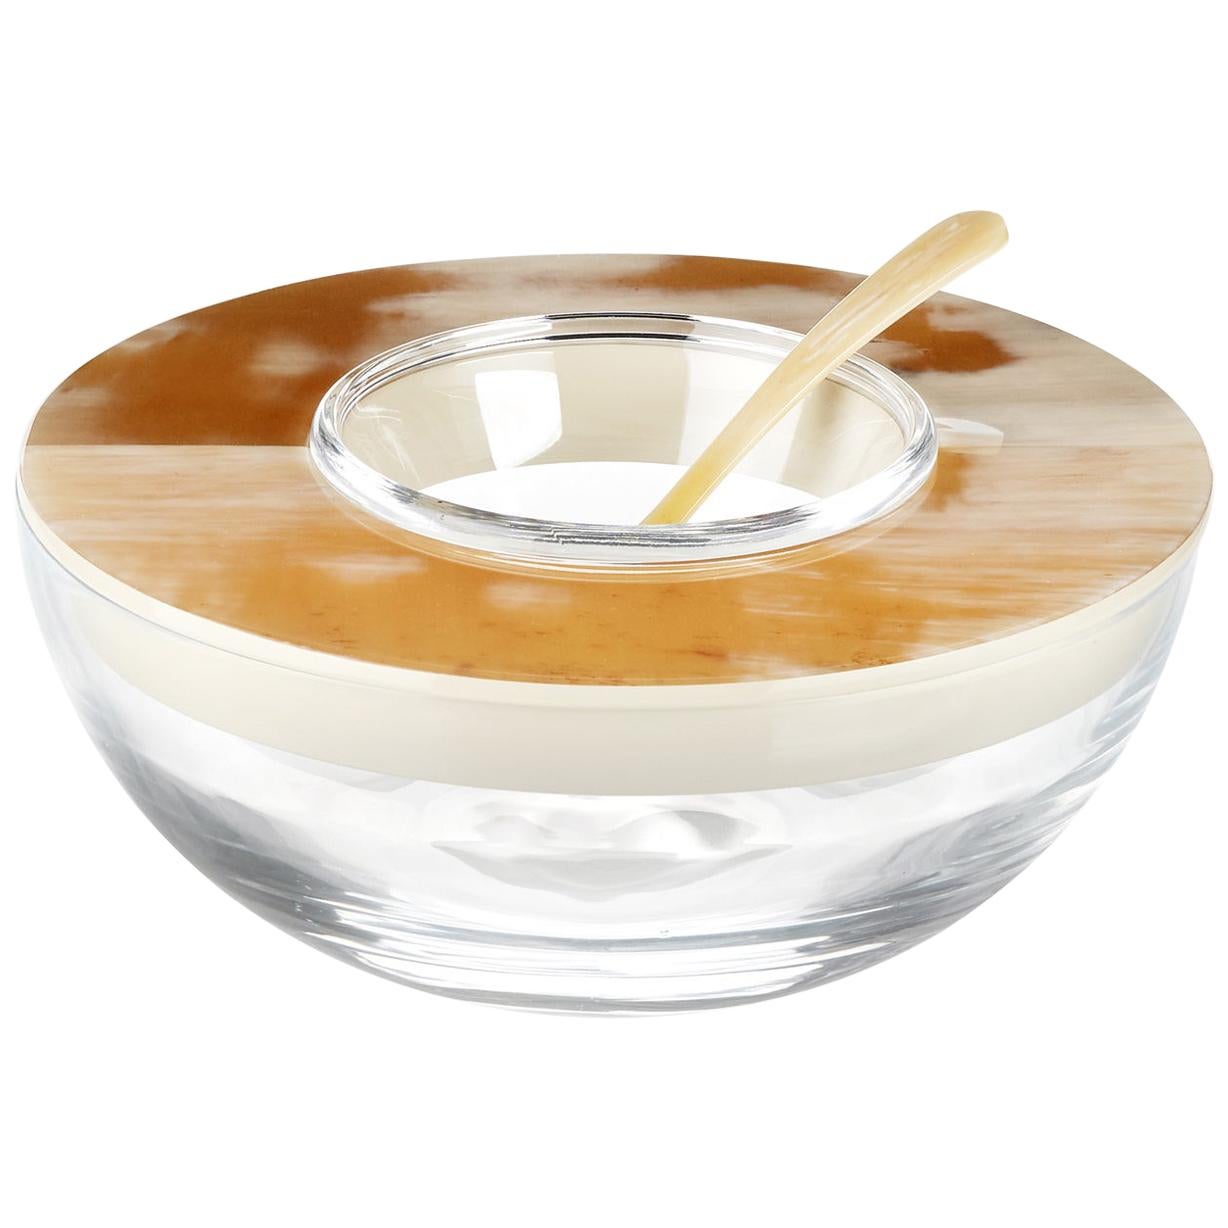 Caviar Bowl and Spoon in Corno Italiano, Crystal and Lacquered wood, Mod. 297